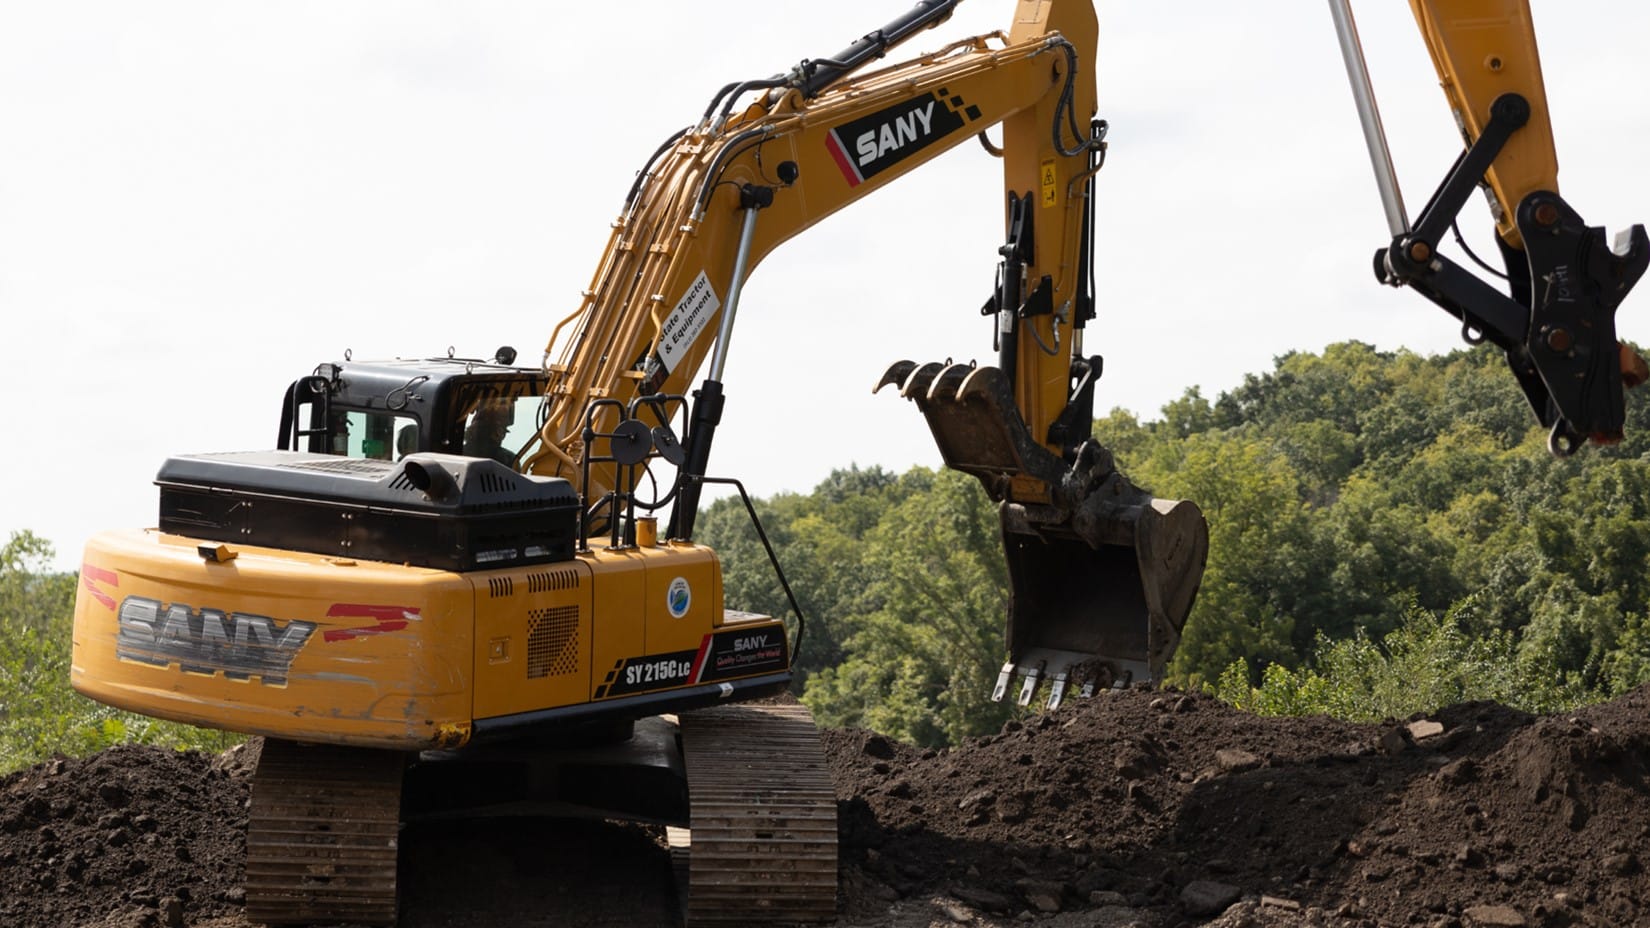 19 Uses for SANY Excavators in Kansas City